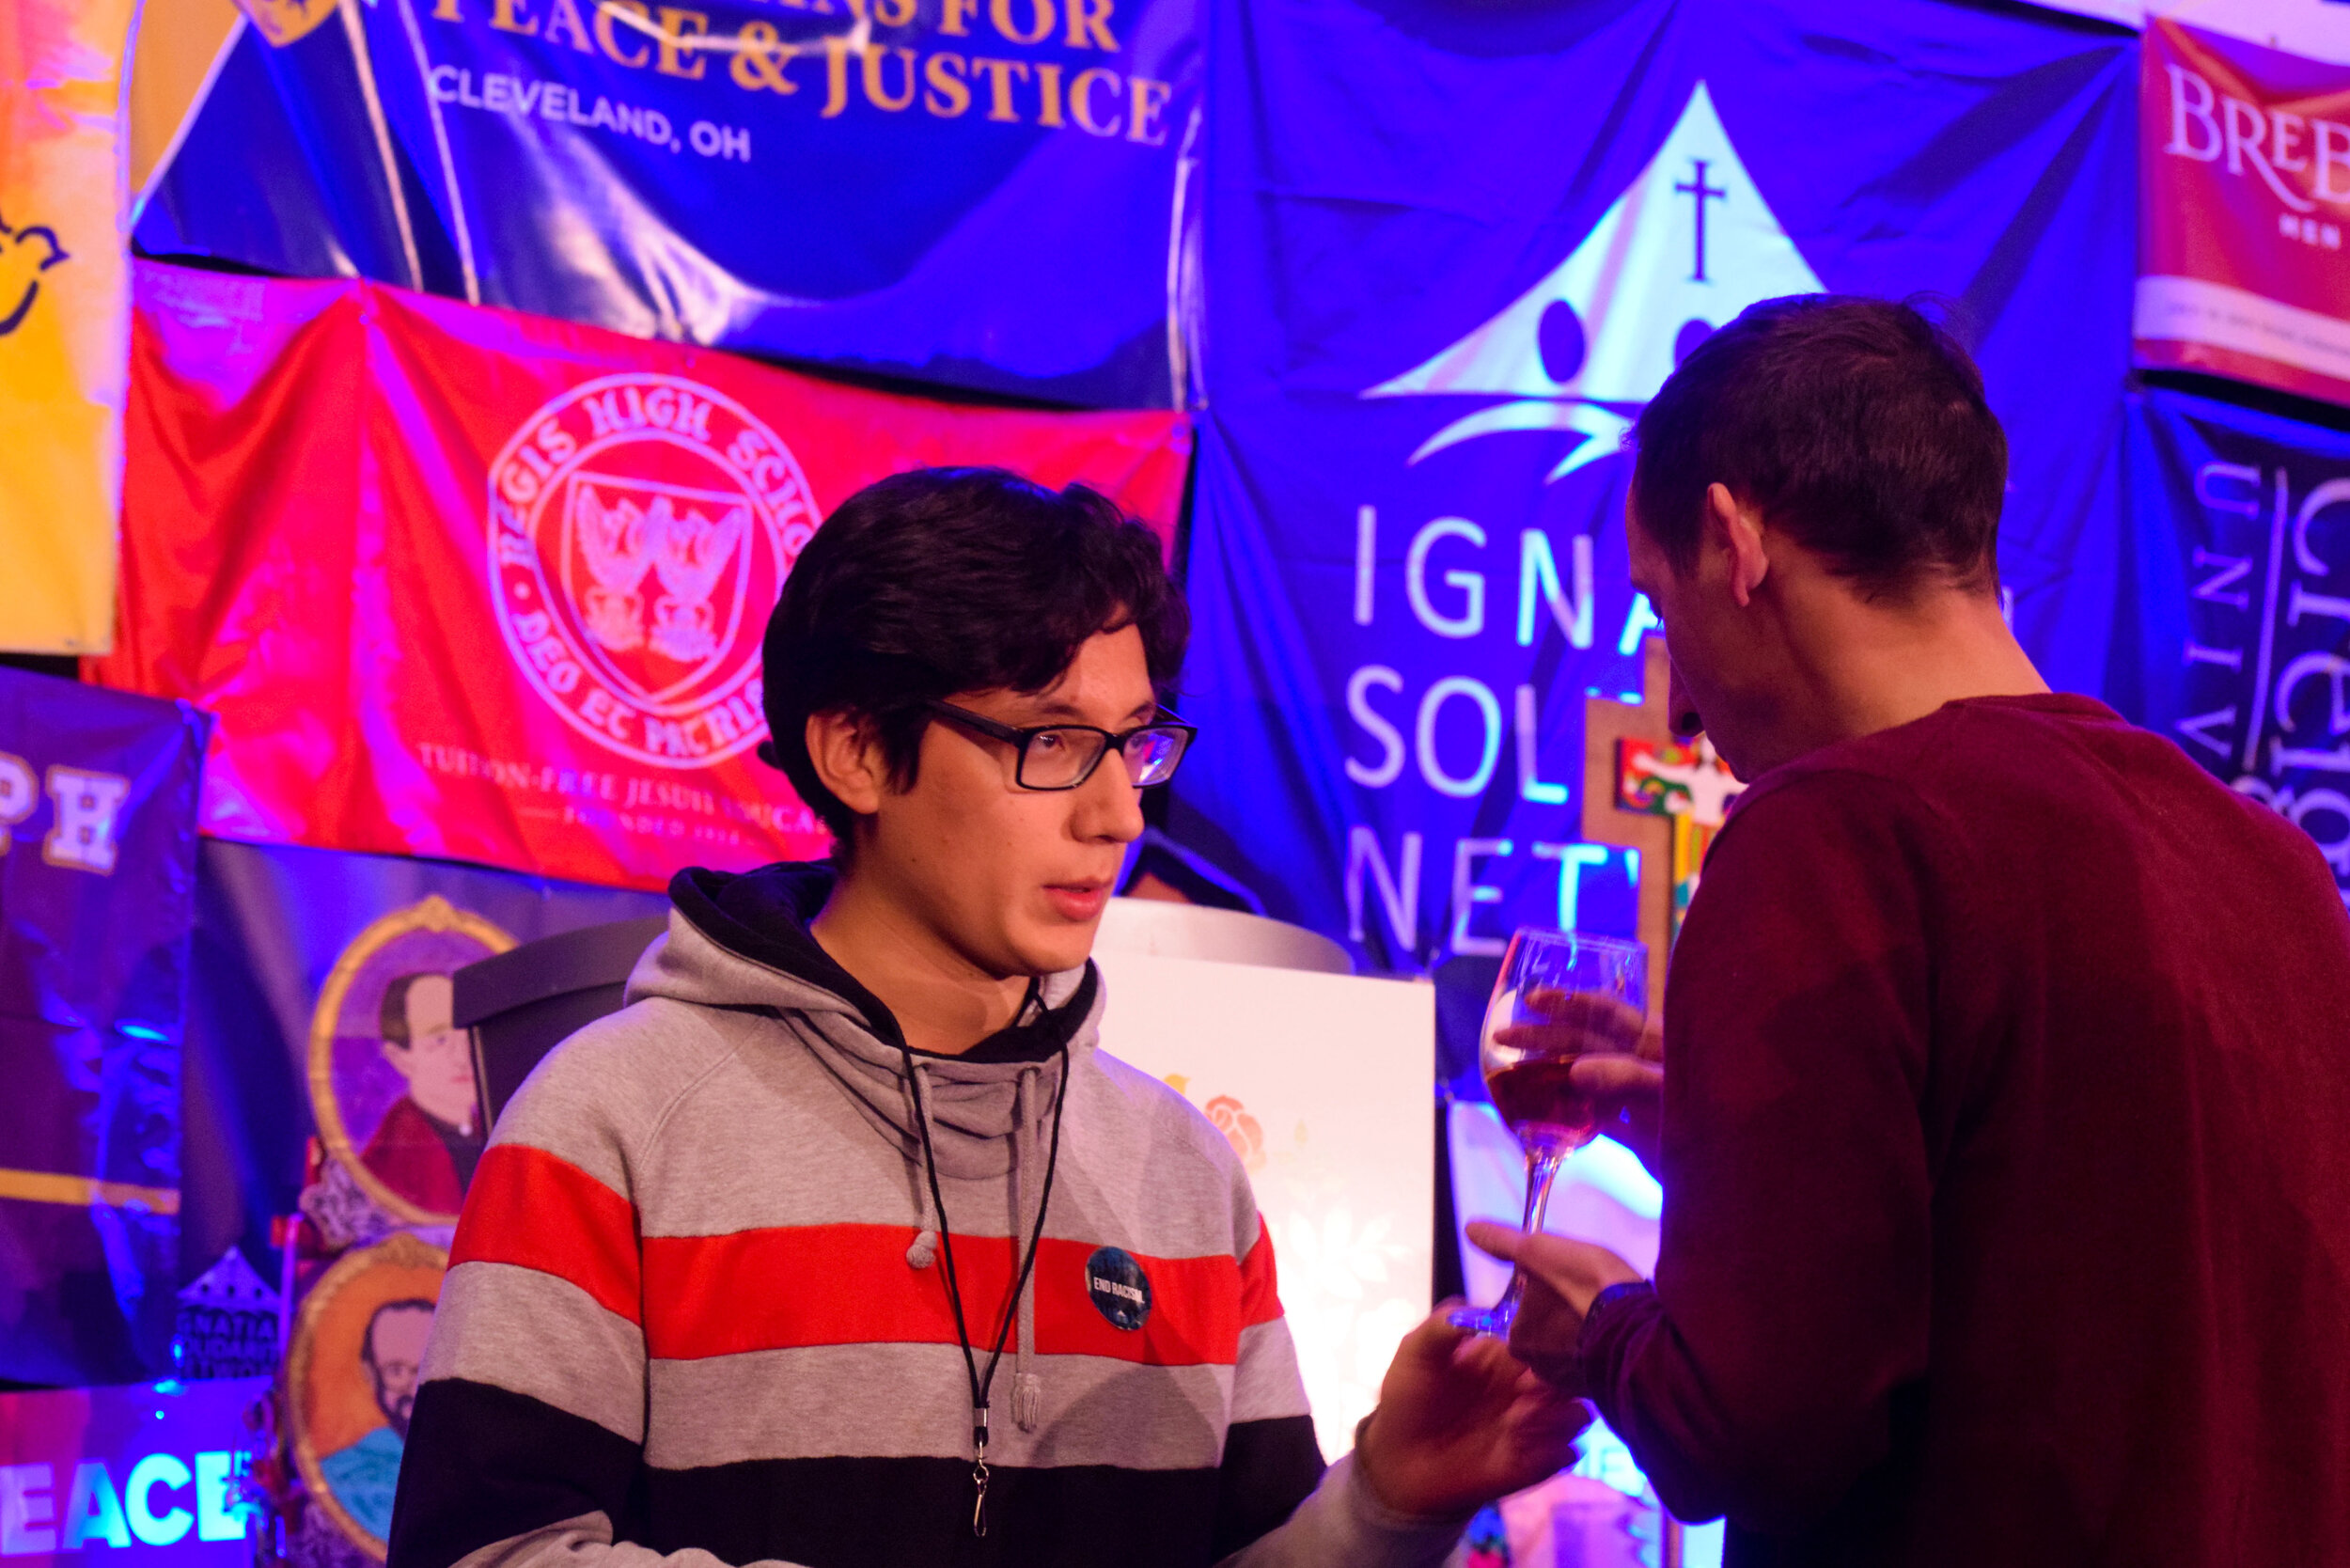  An IFTJ attendee receives Holy Communion during the 2019 Ignatian Family Teach-In for Justice Sunday mass in Washington, D.C. Over 2,000 students from Jesuit institutions gathered to celebrate the mass and worship together. (Sydney Clark/The Black E